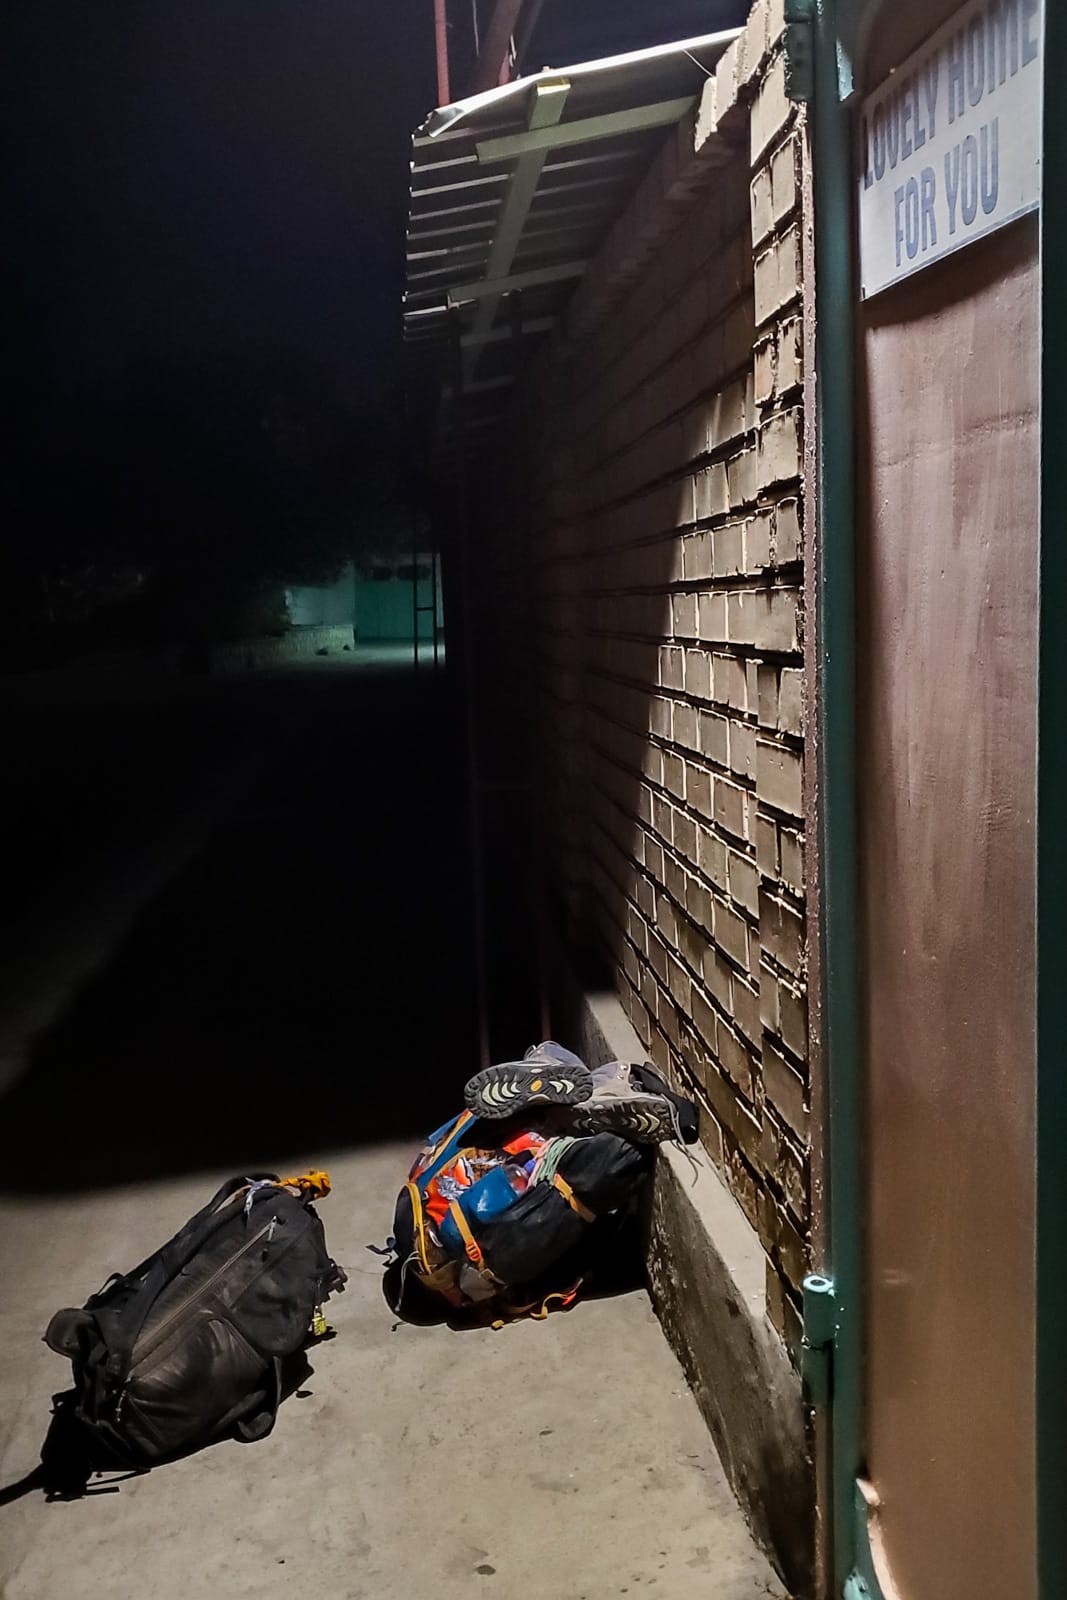 Backpacks outside a guesthouse in Osh, Kyrgyzstan at night